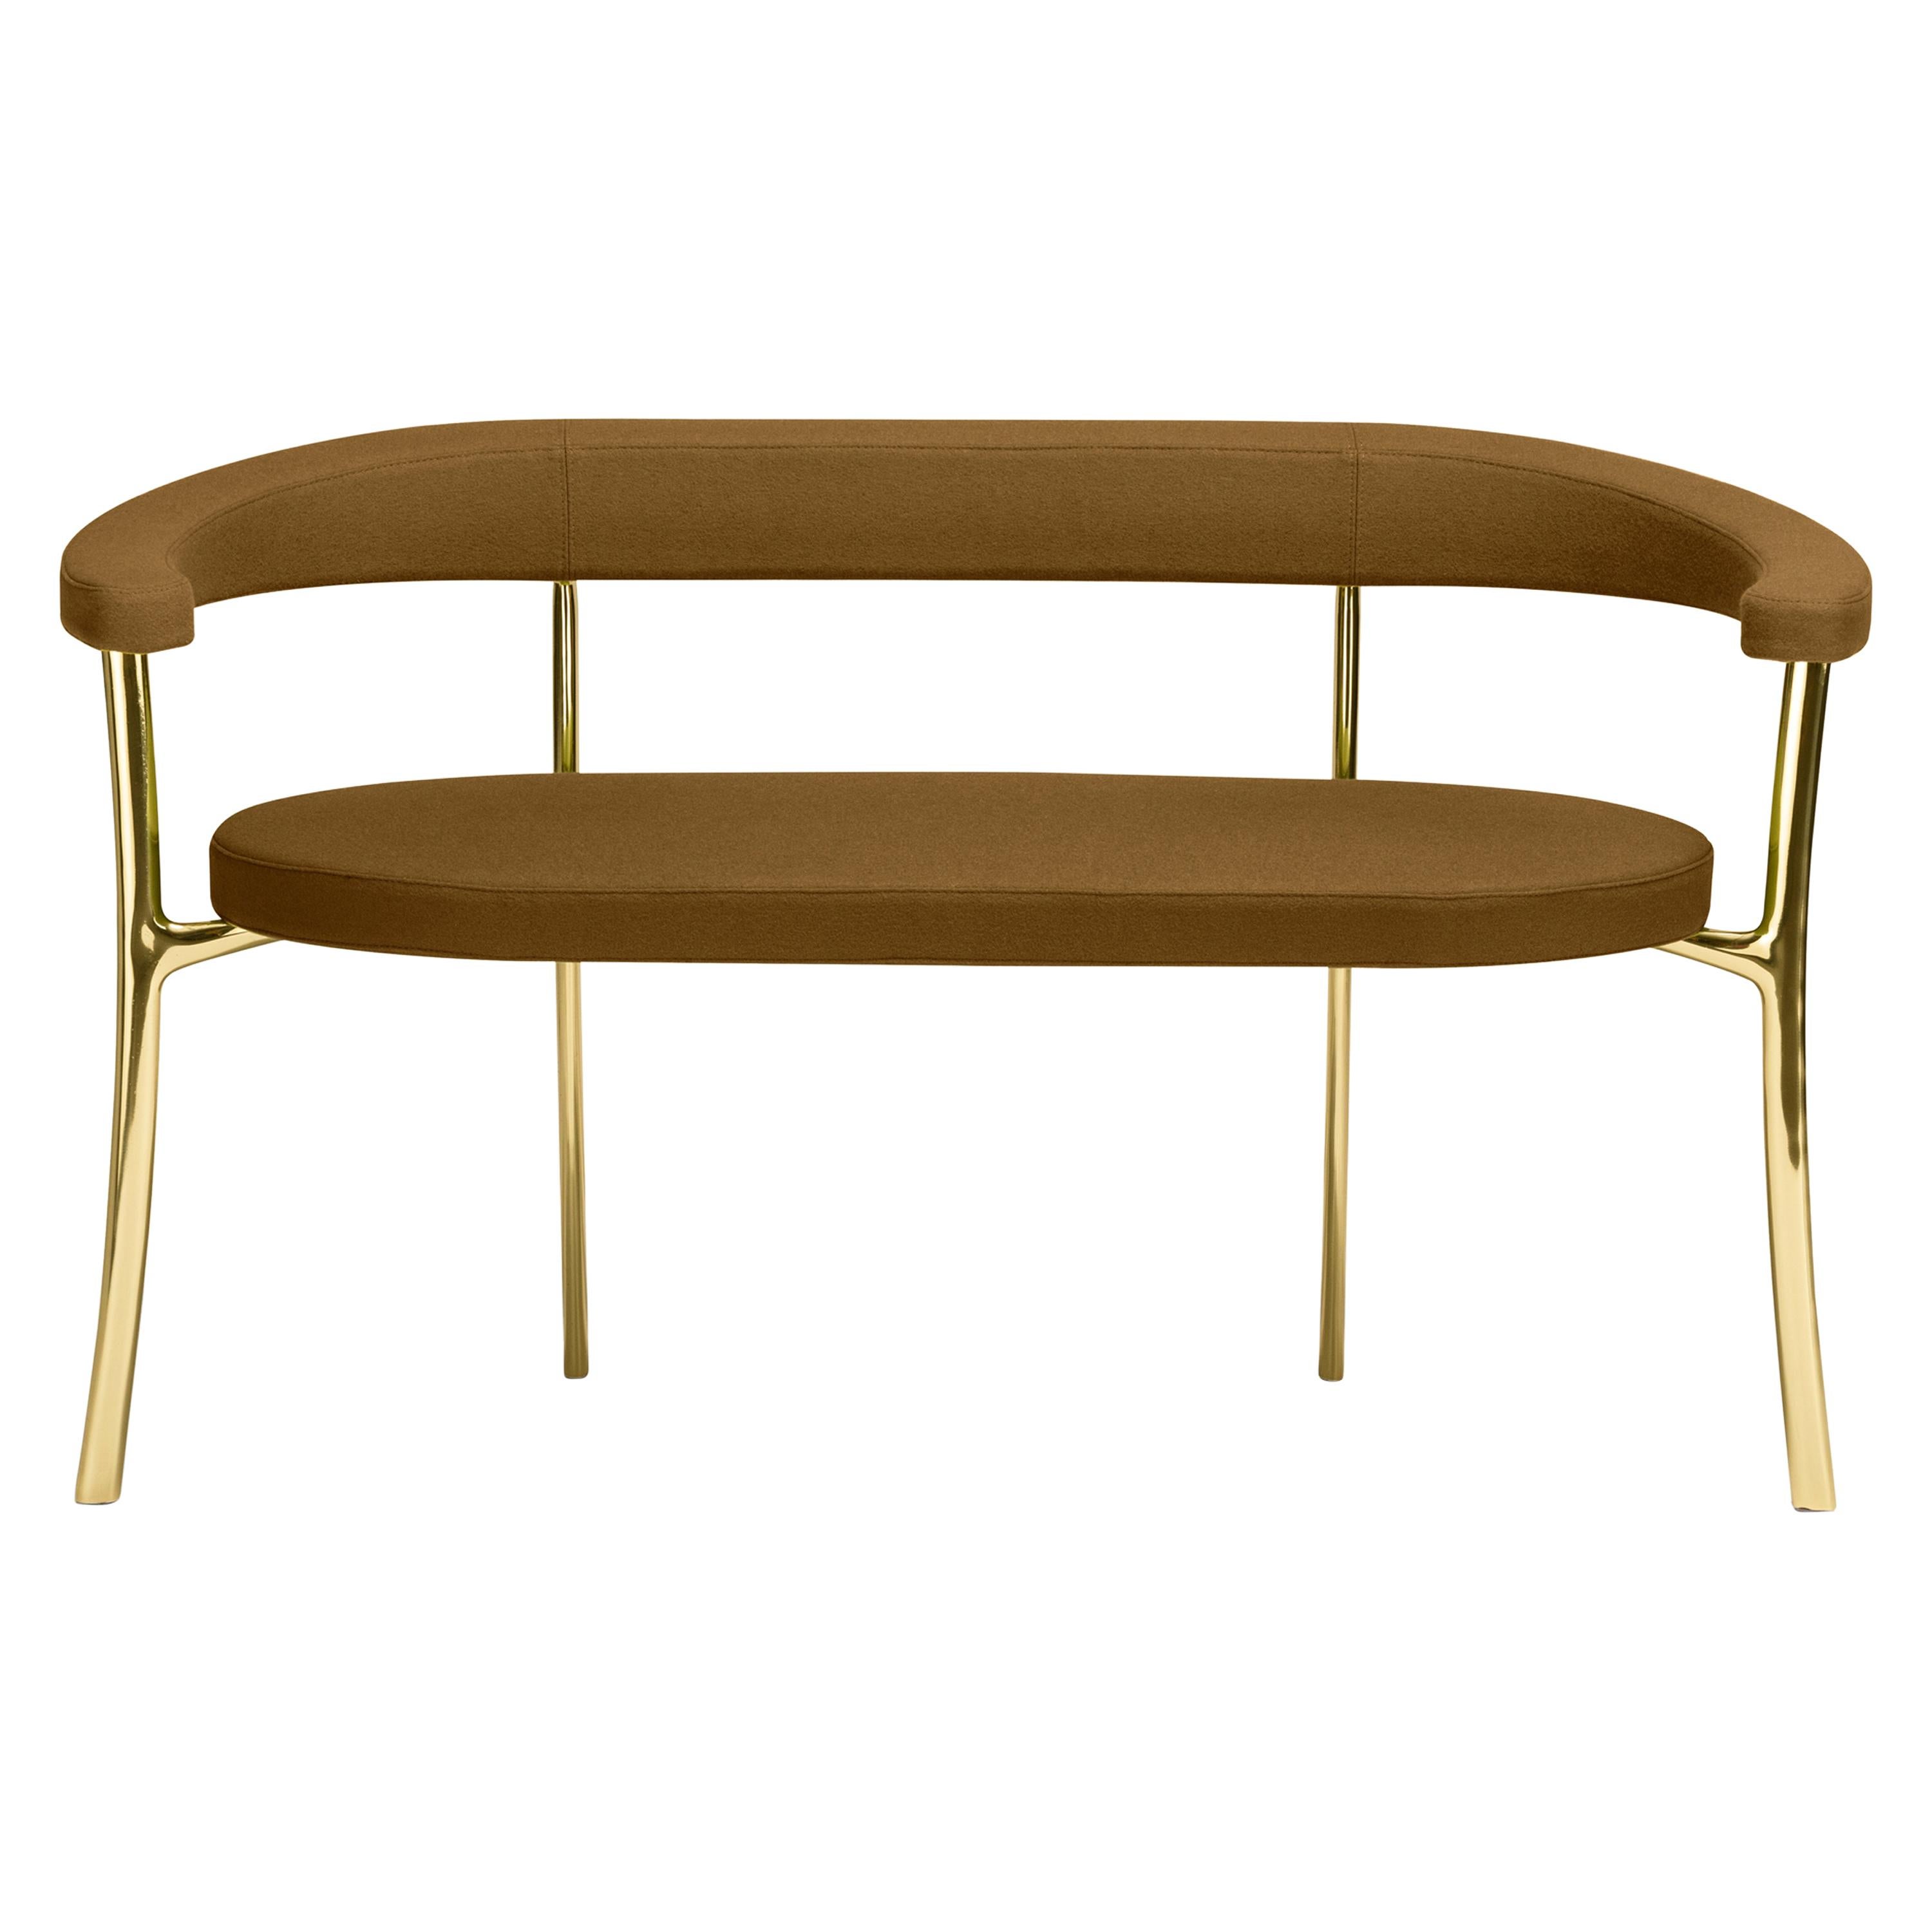 Katana Bench in Tobacco Fabric with Polished Brass by Paolo Rizzatto For Sale